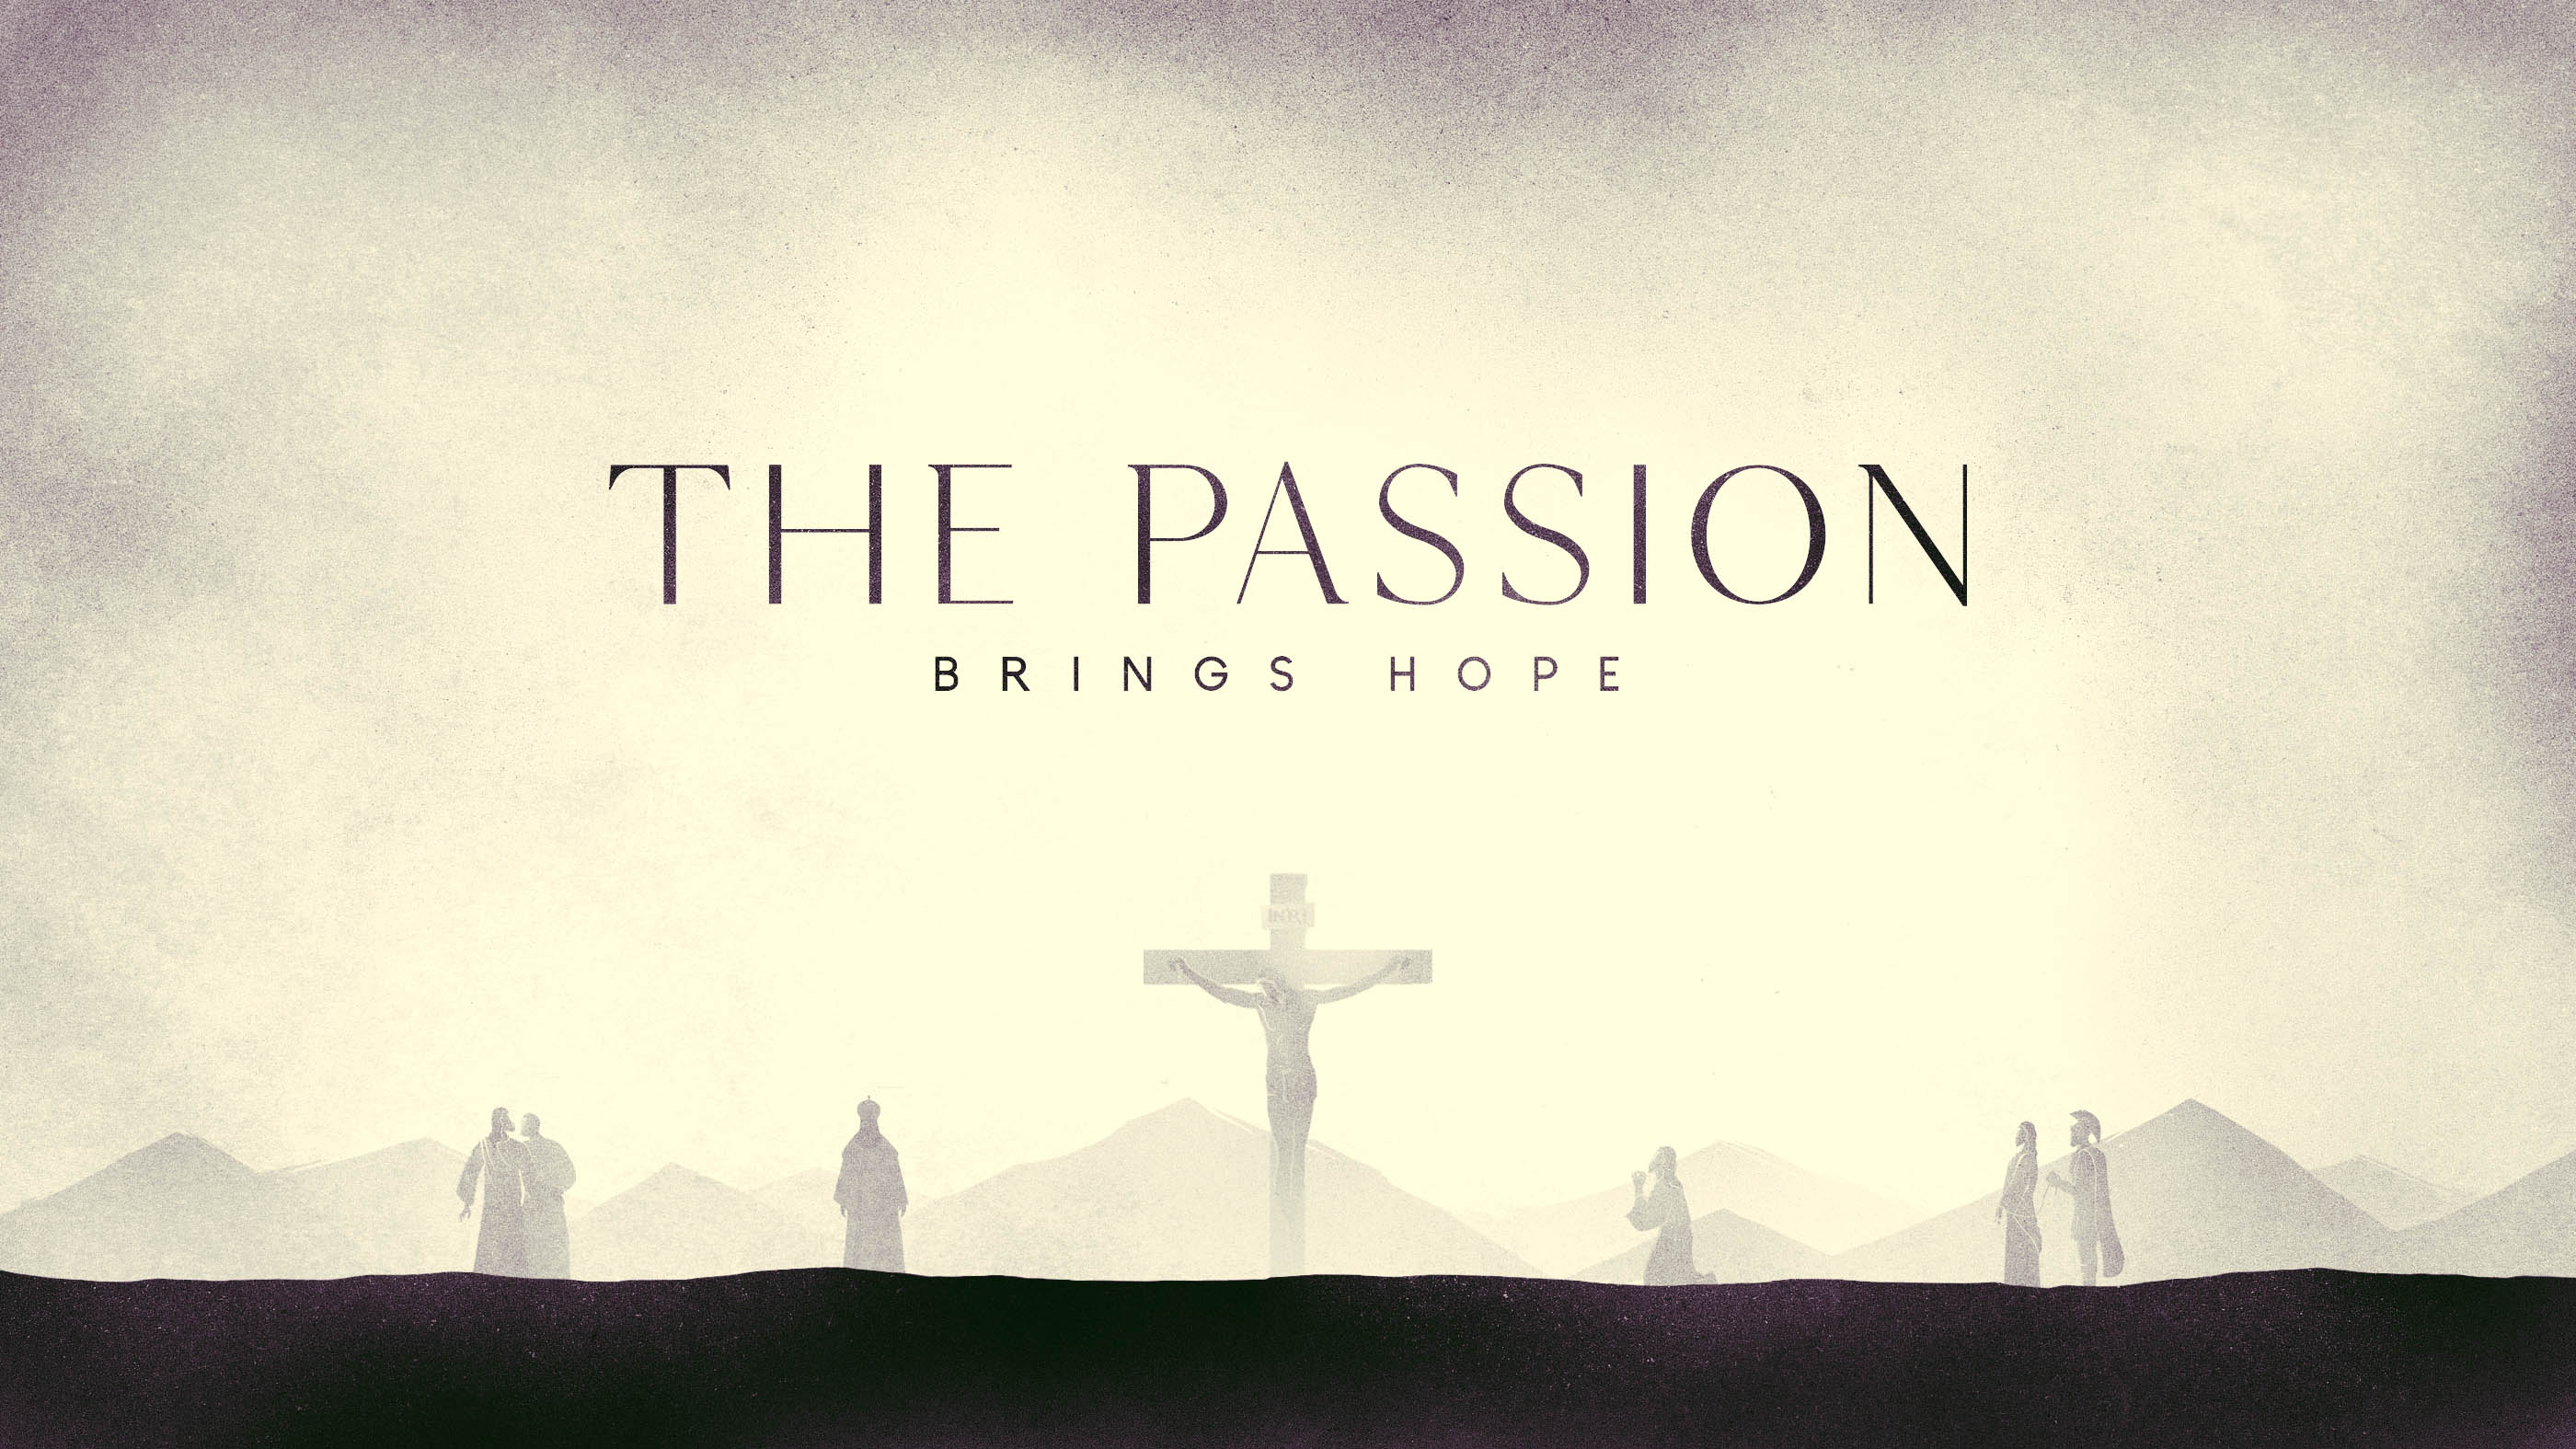 THE PASSION BRINGS HOPE